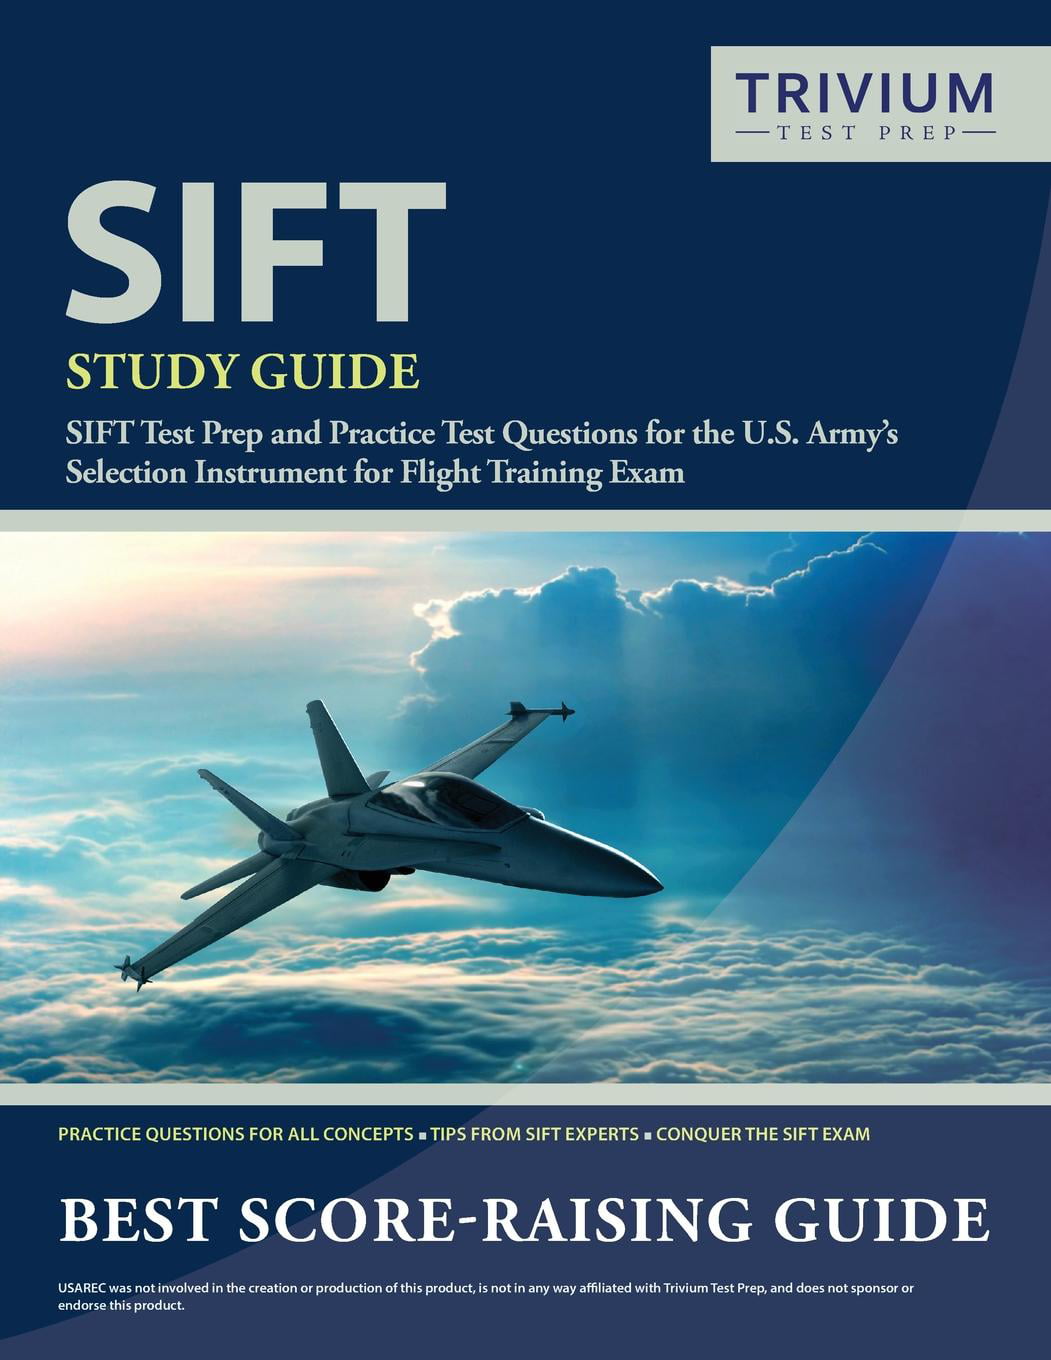 sift-study-guide-sift-test-prep-and-practice-test-questions-for-the-u-s-army-s-selection